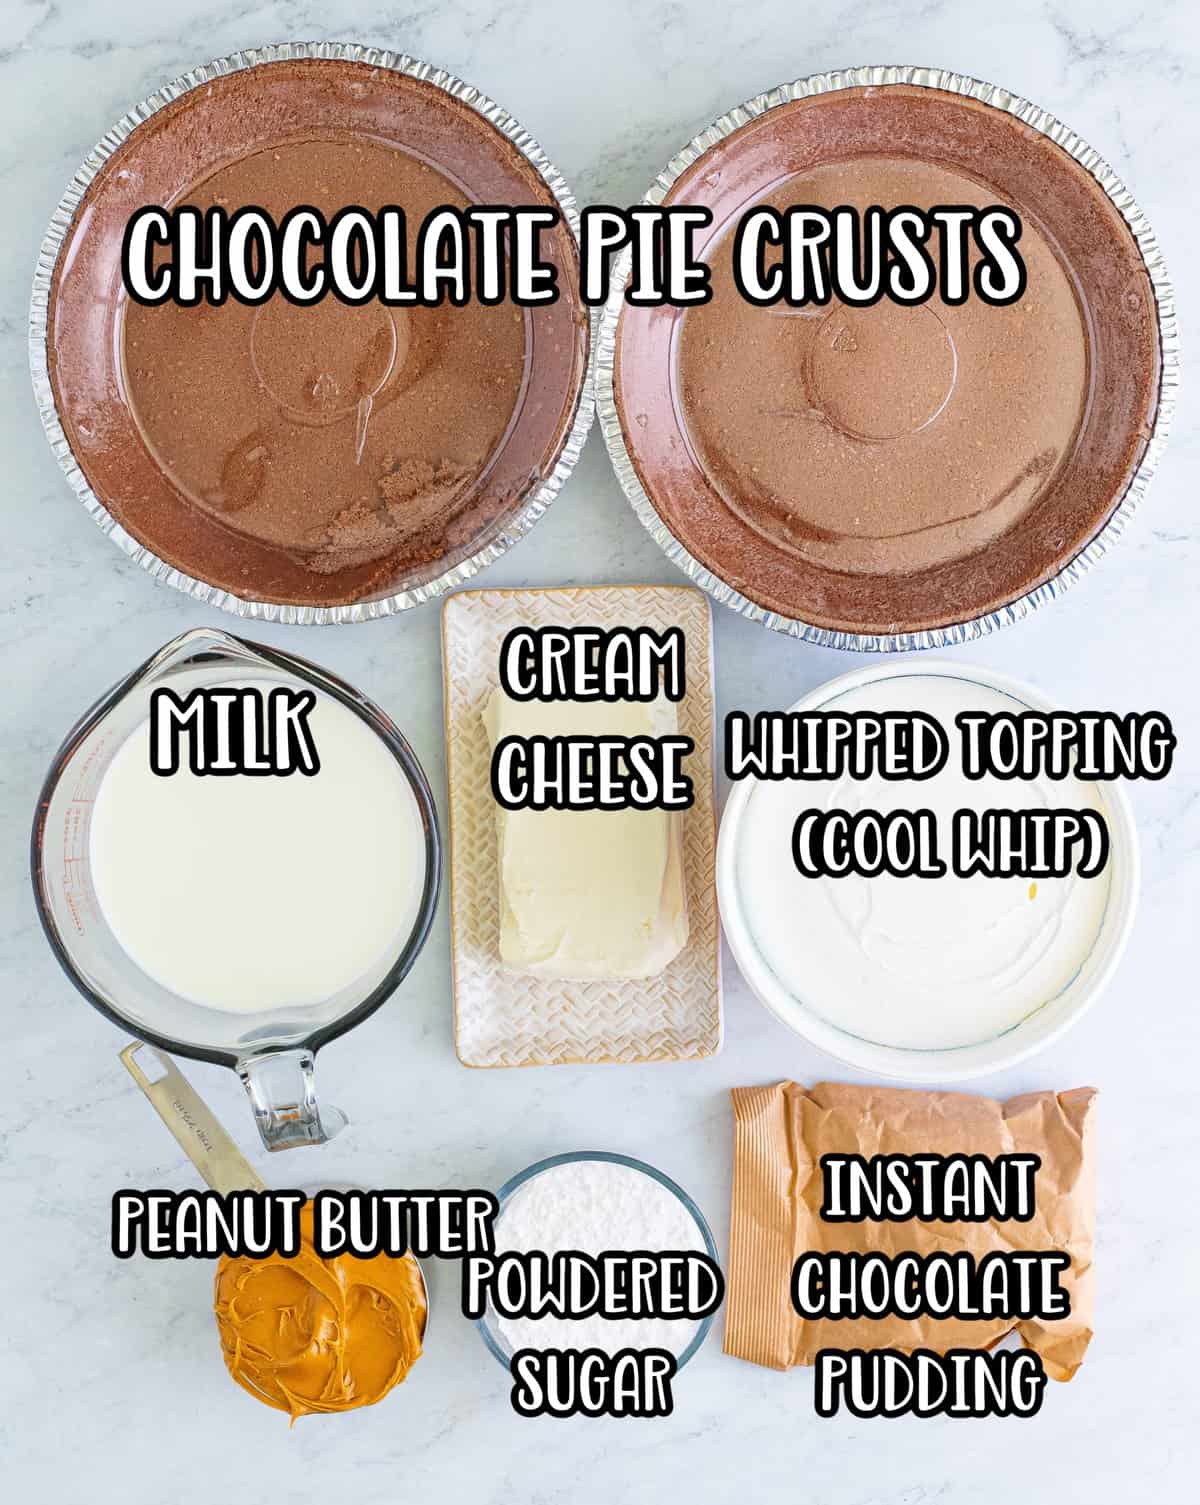 Chocolate pie crusts, milk, cream cheese, chocolate pudding mix, creamy peanut butter, powdered sugar, and whipped topping